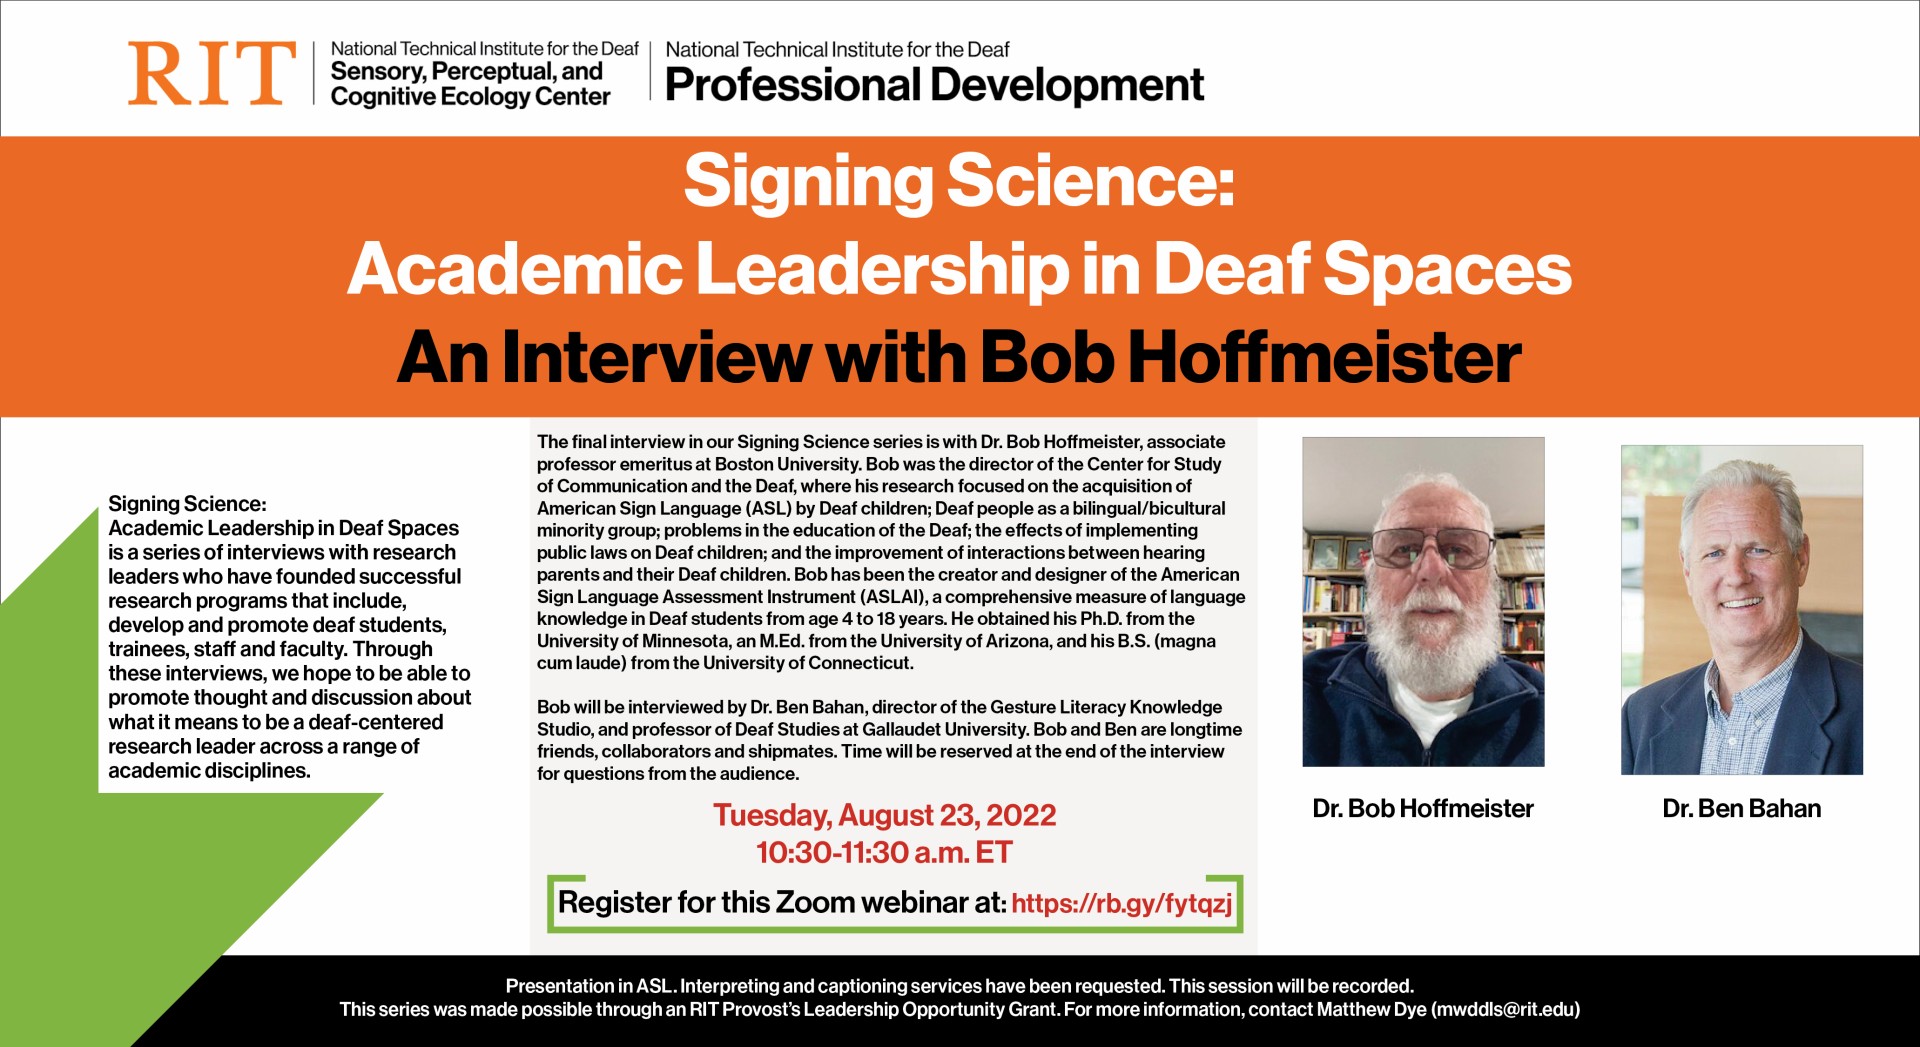 Event flyer for Signing Science